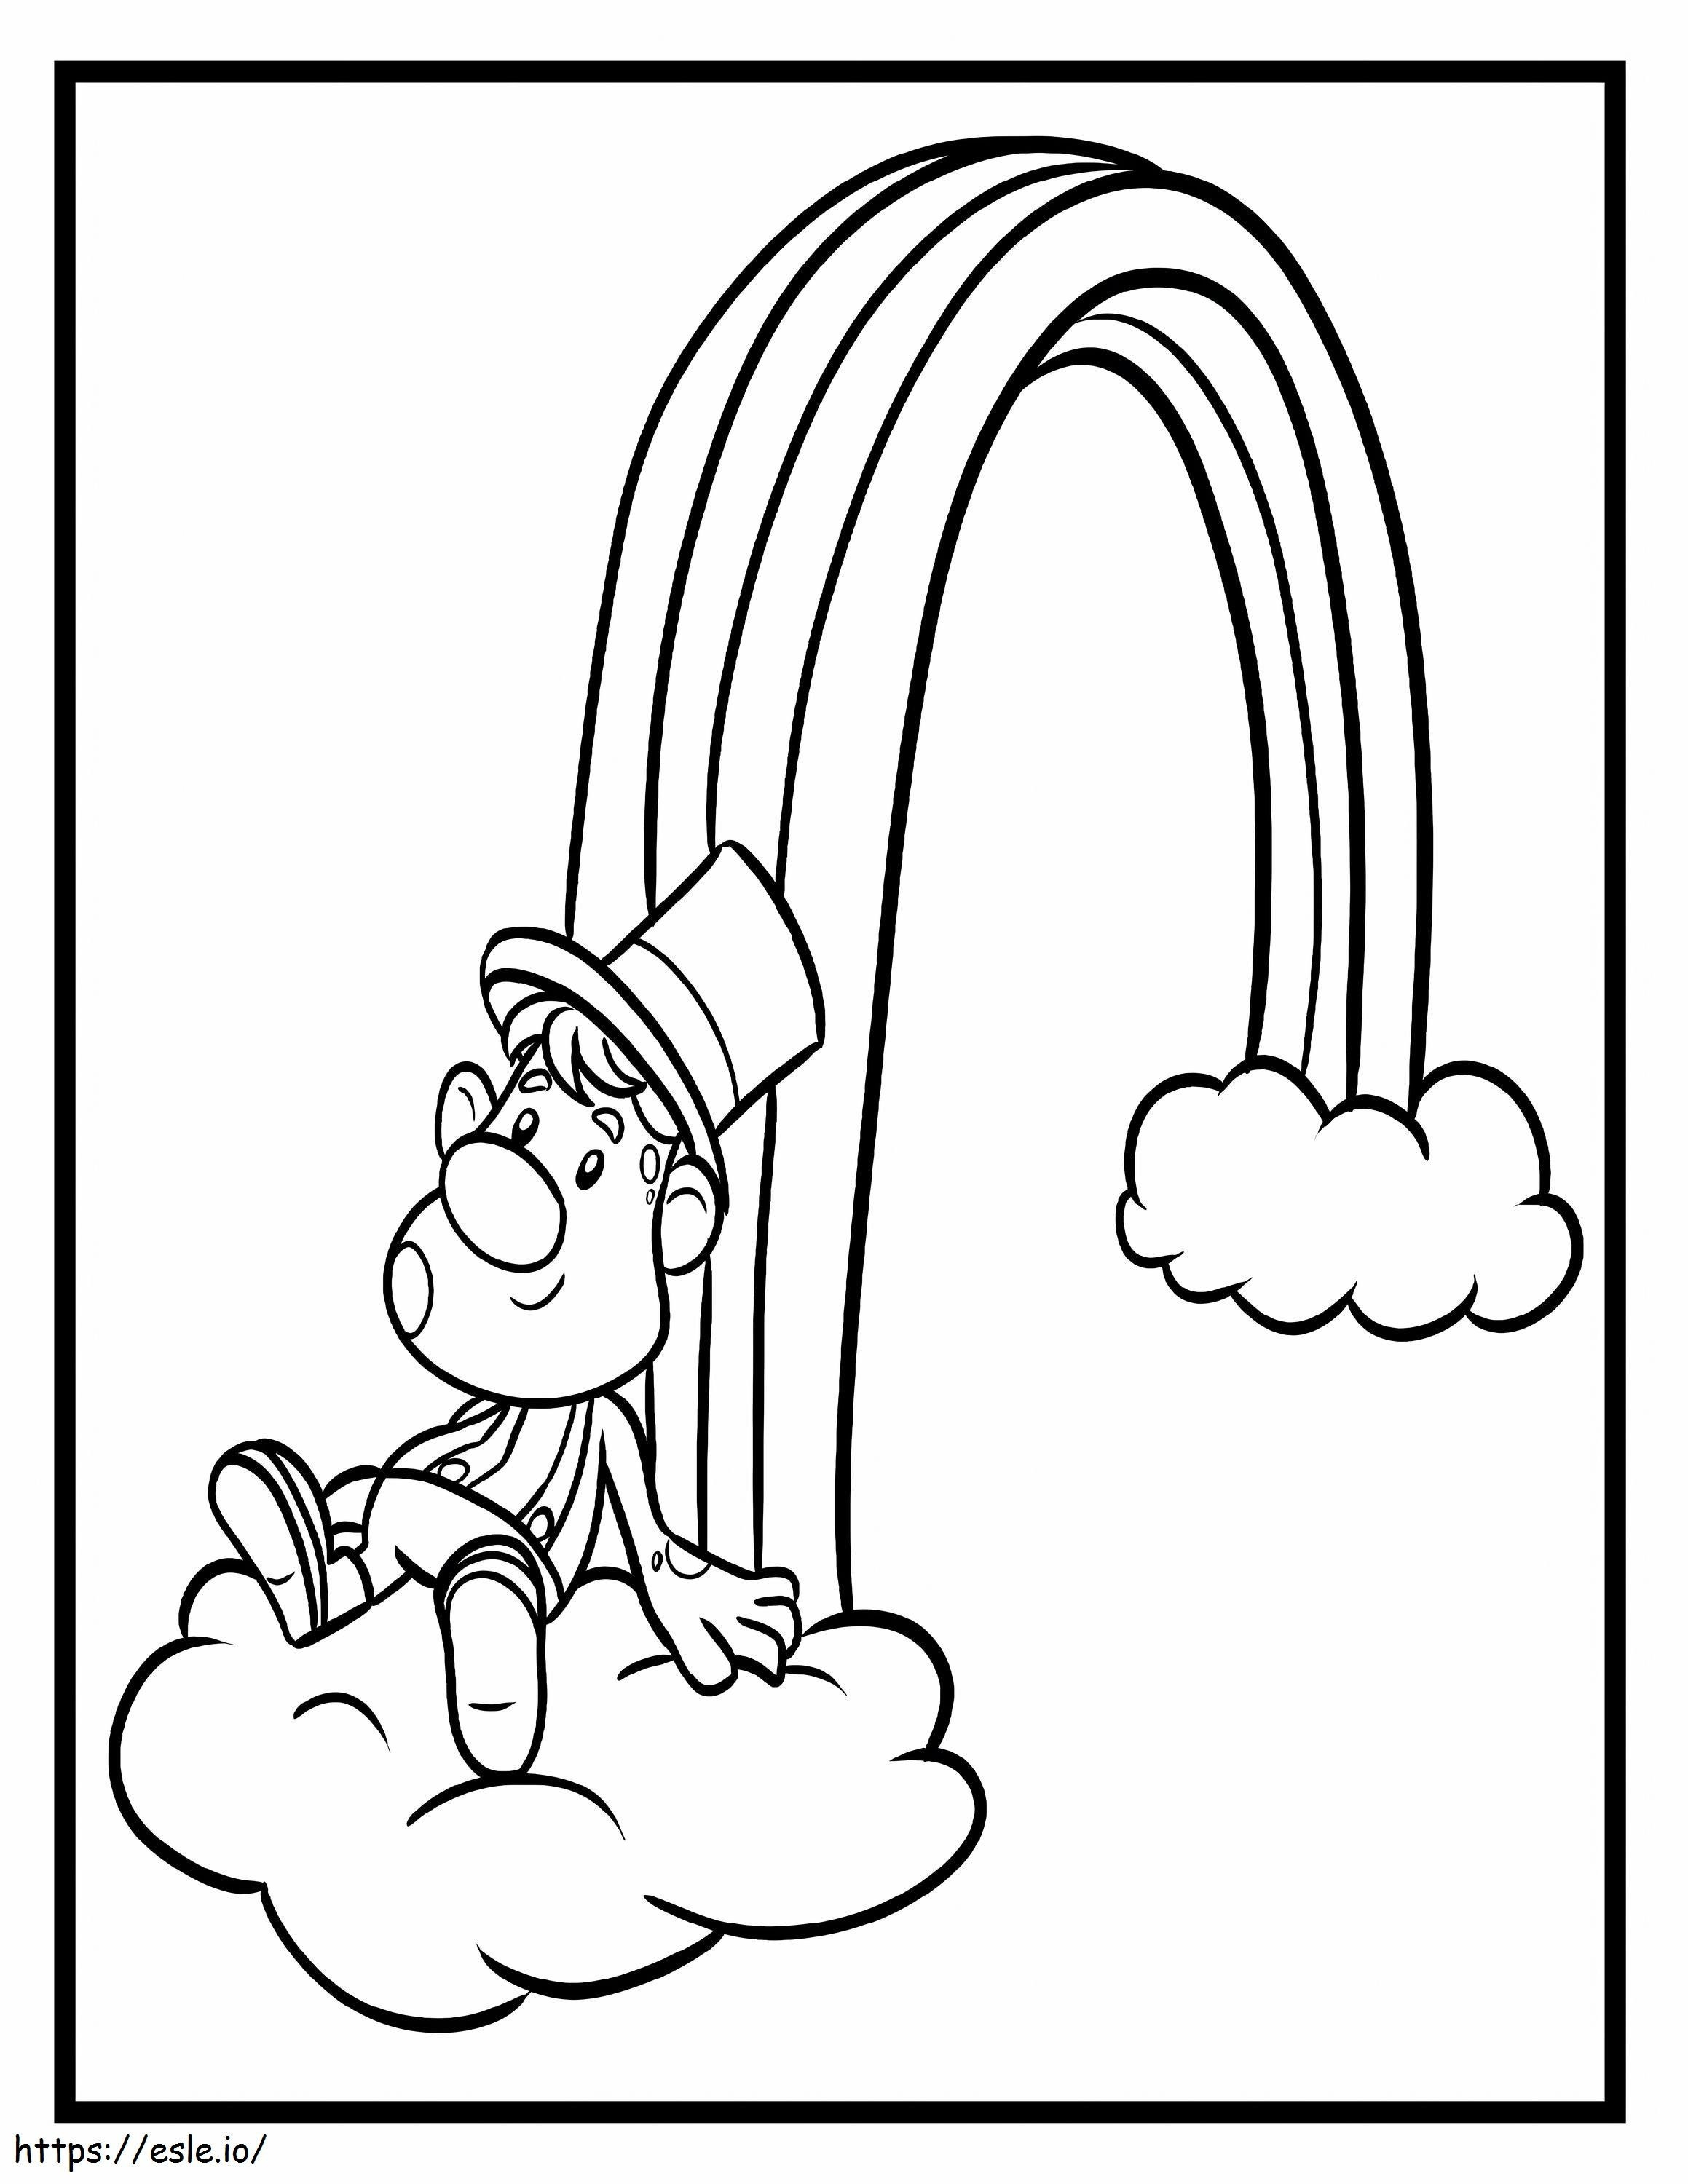 Smiling Man Sitting On Scaled Cloud coloring page